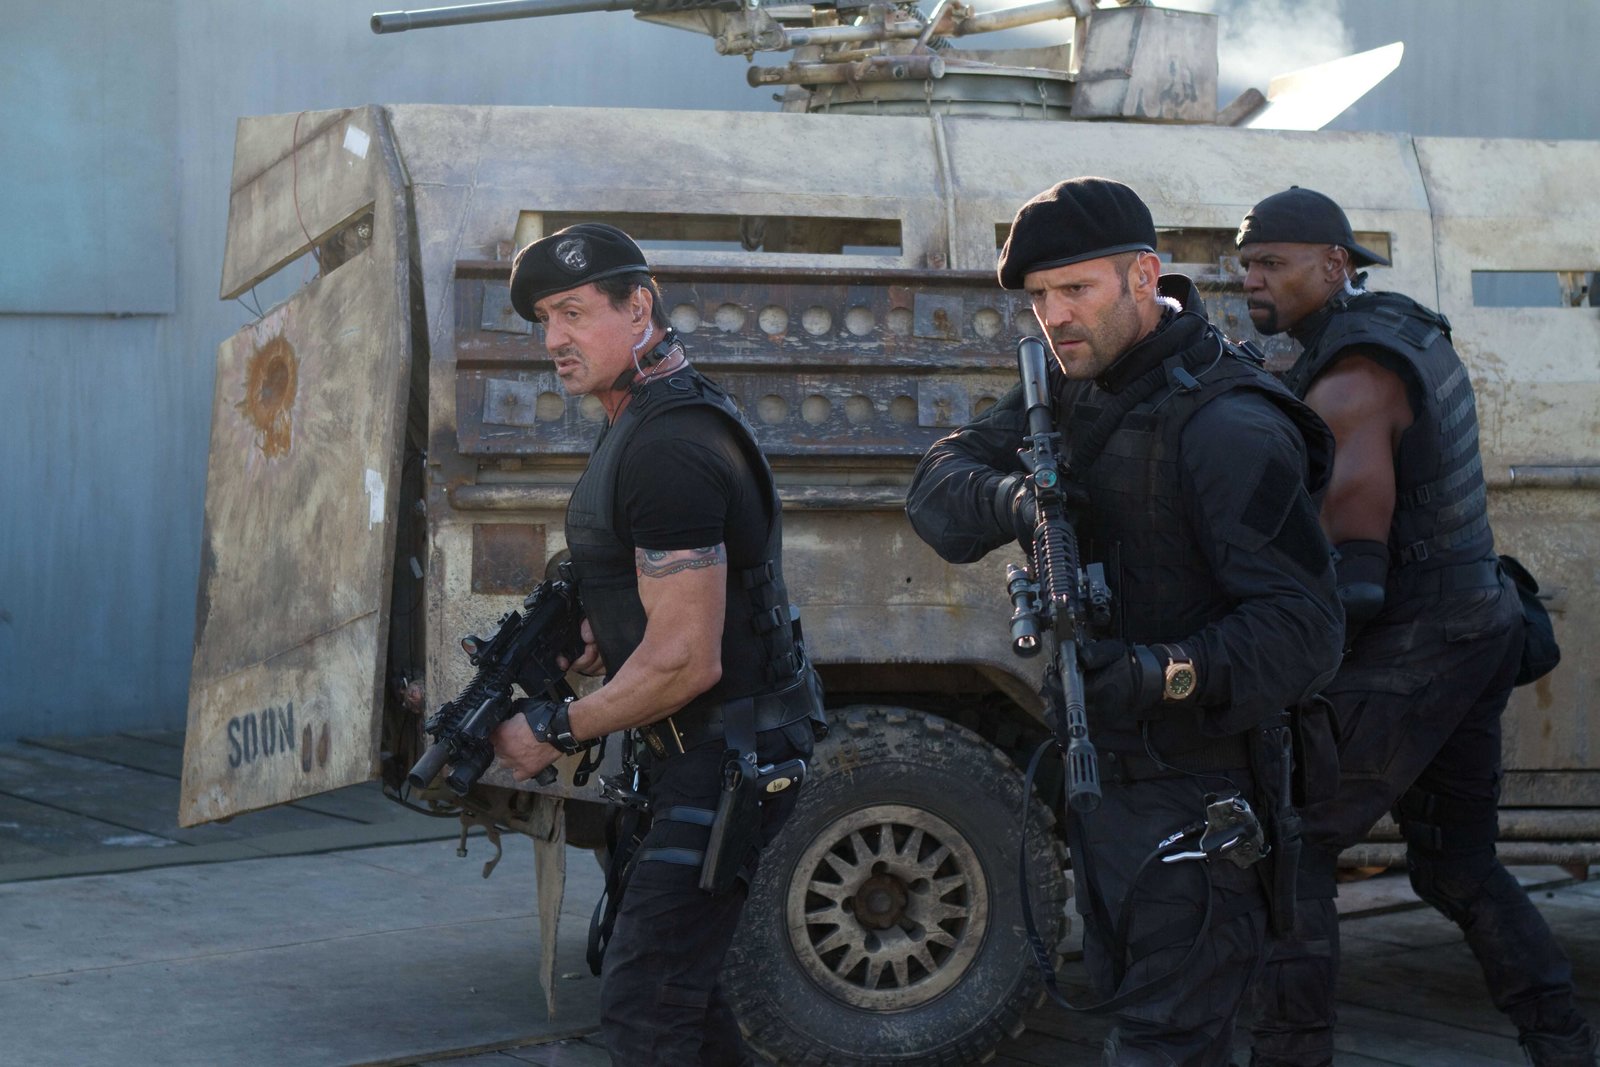 Expendables 2, The